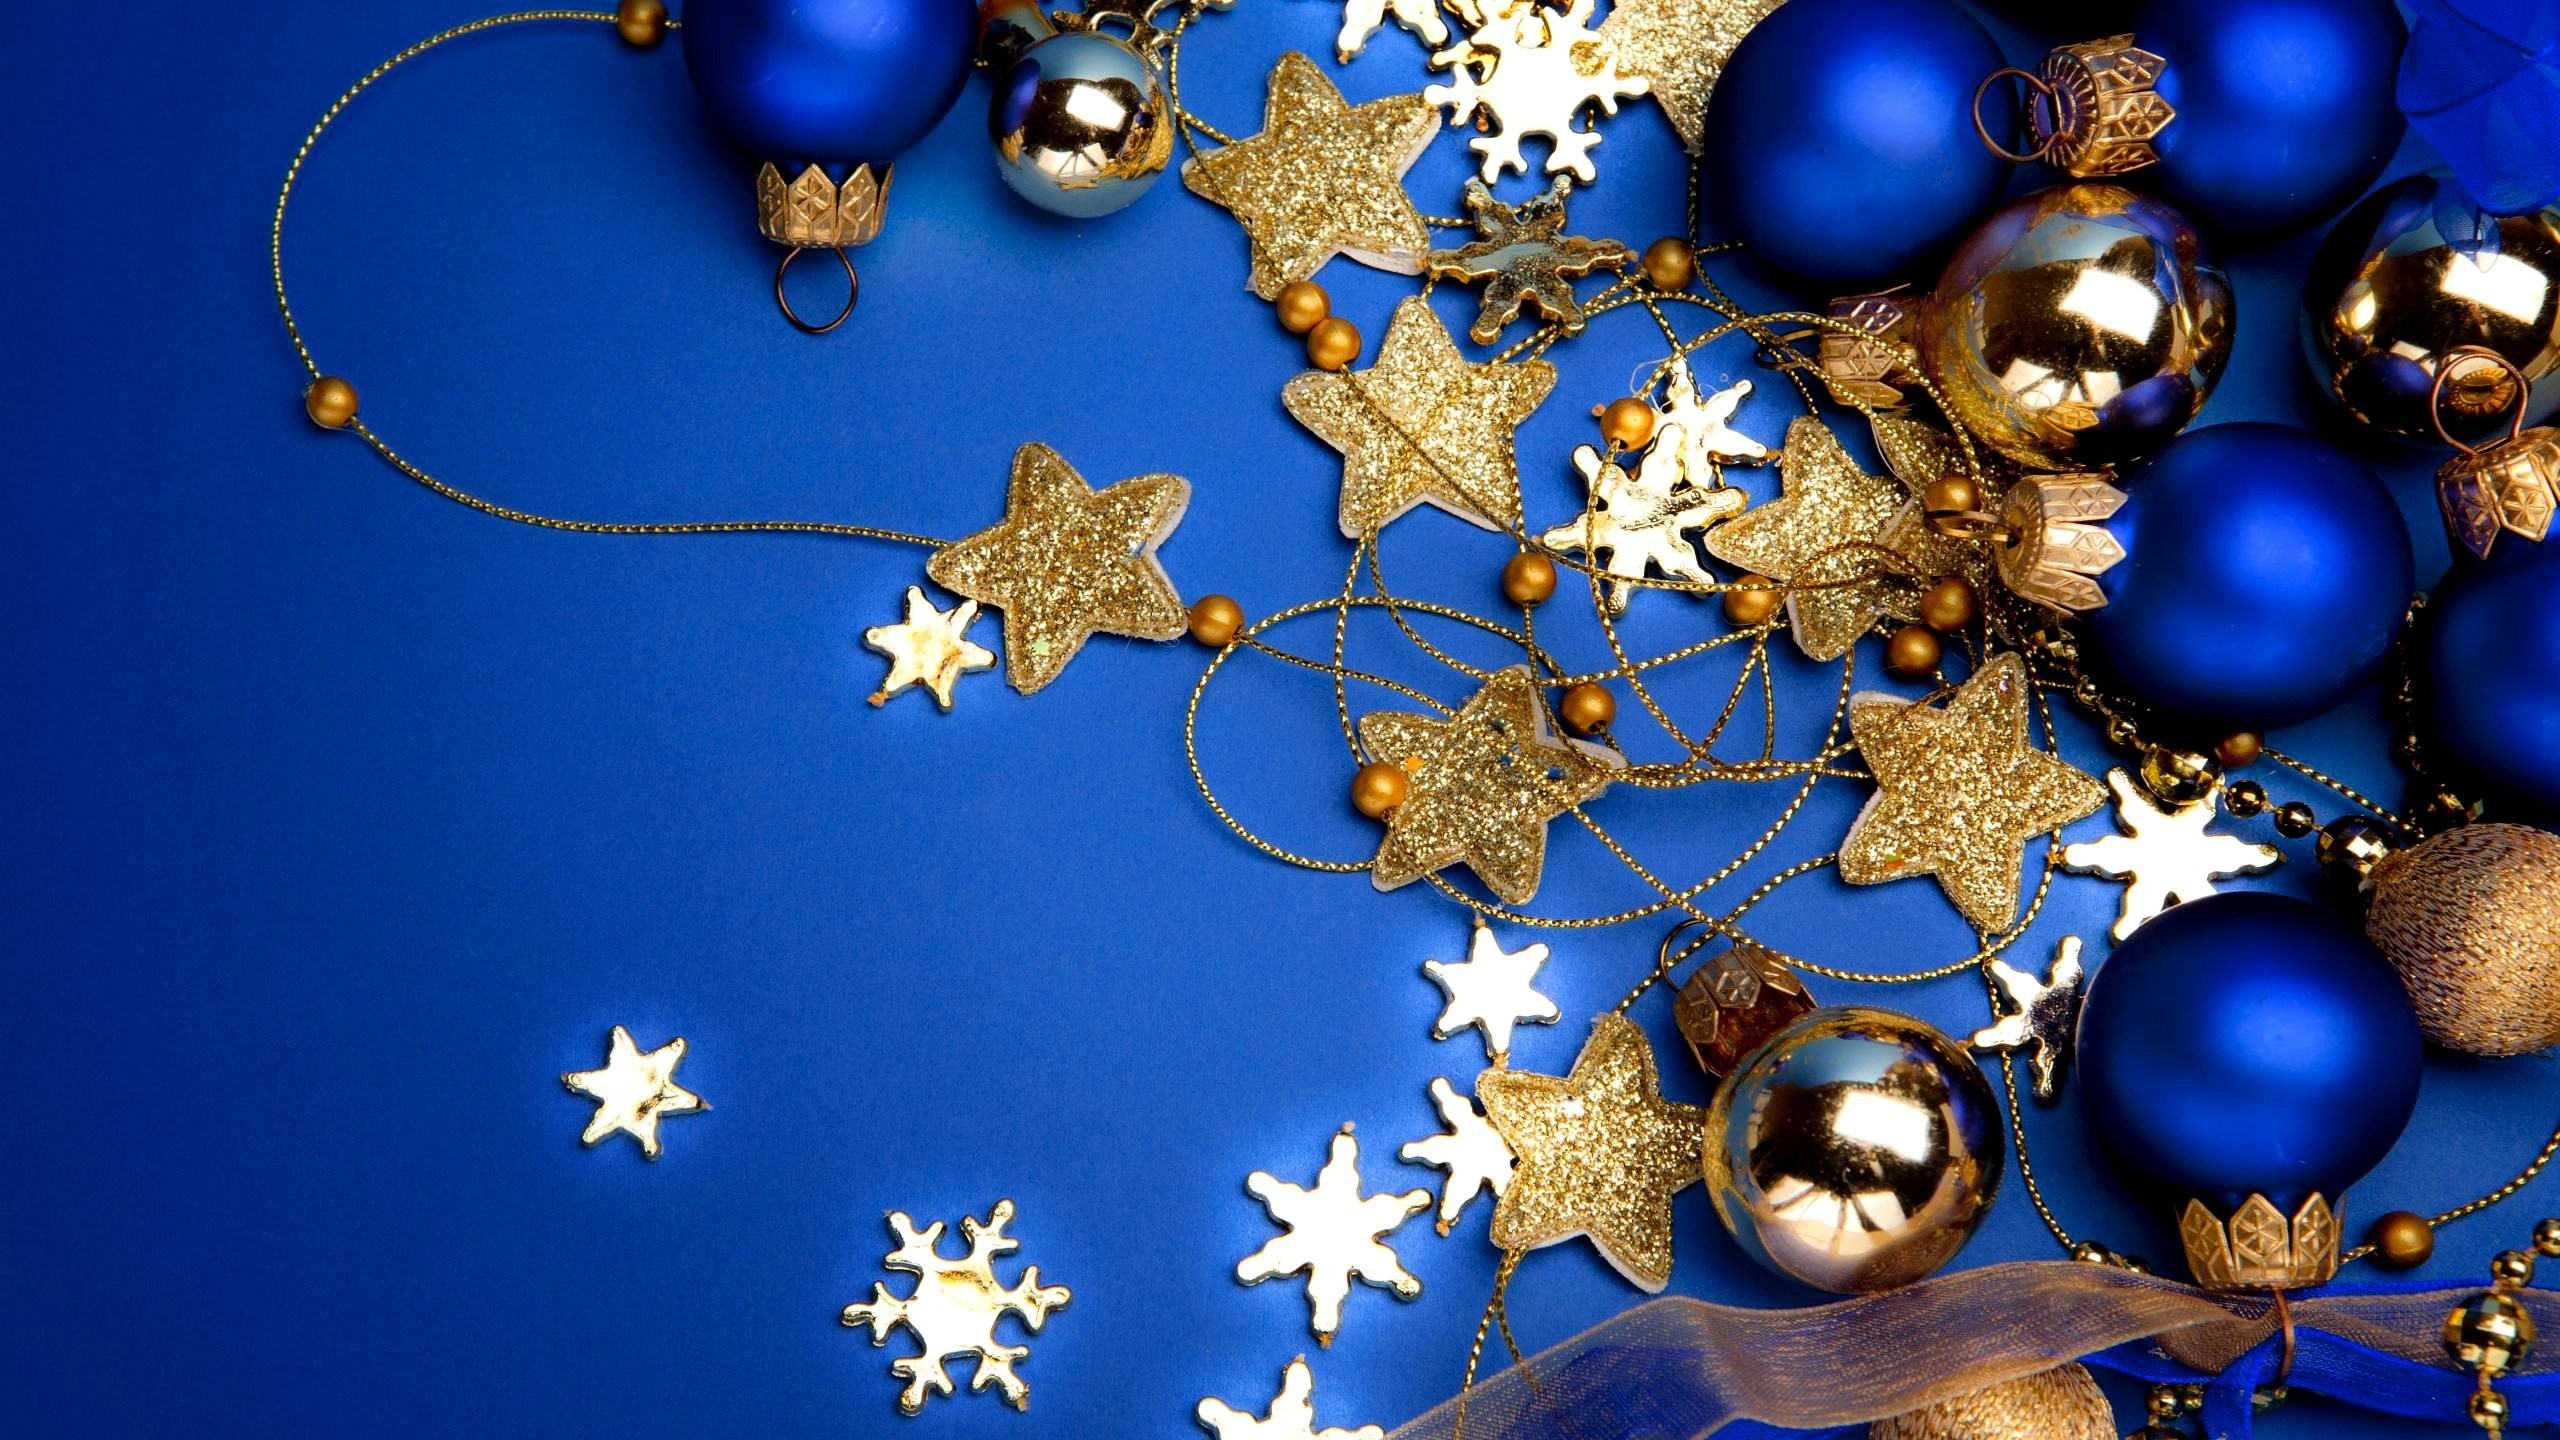 2560x1440 ... backgrounds for blue and gold christmas wallpaper backgrounds ...